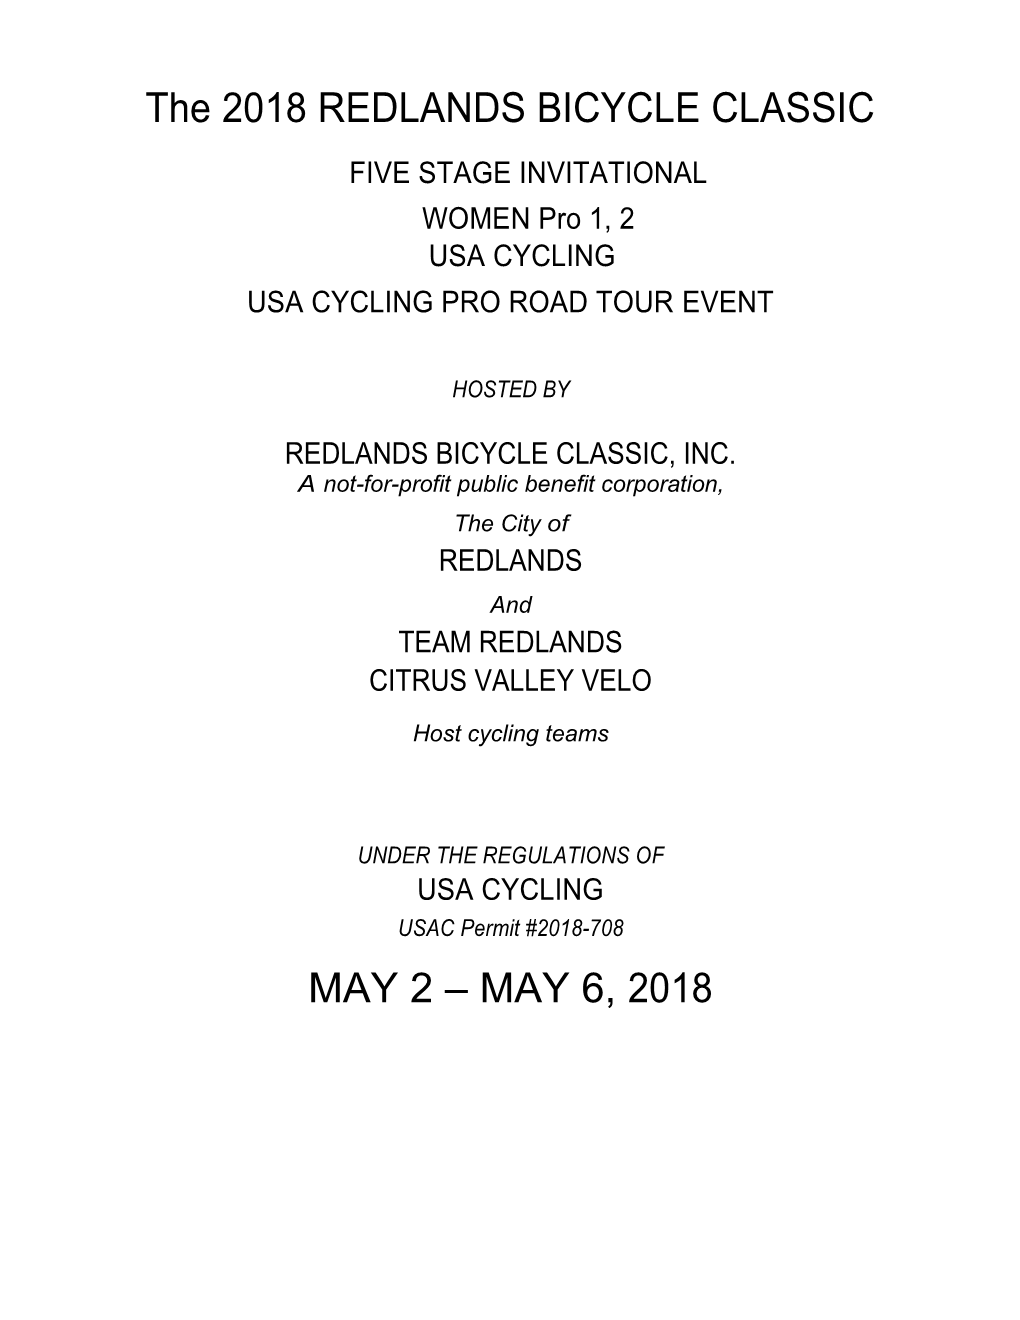 2018 REDLANDS BICYCLE CLASSIC FIVE STAGE INVITATIONAL WOMEN Pro 1, 2 USA CYCLING USA CYCLING PRO ROAD TOUR EVENT